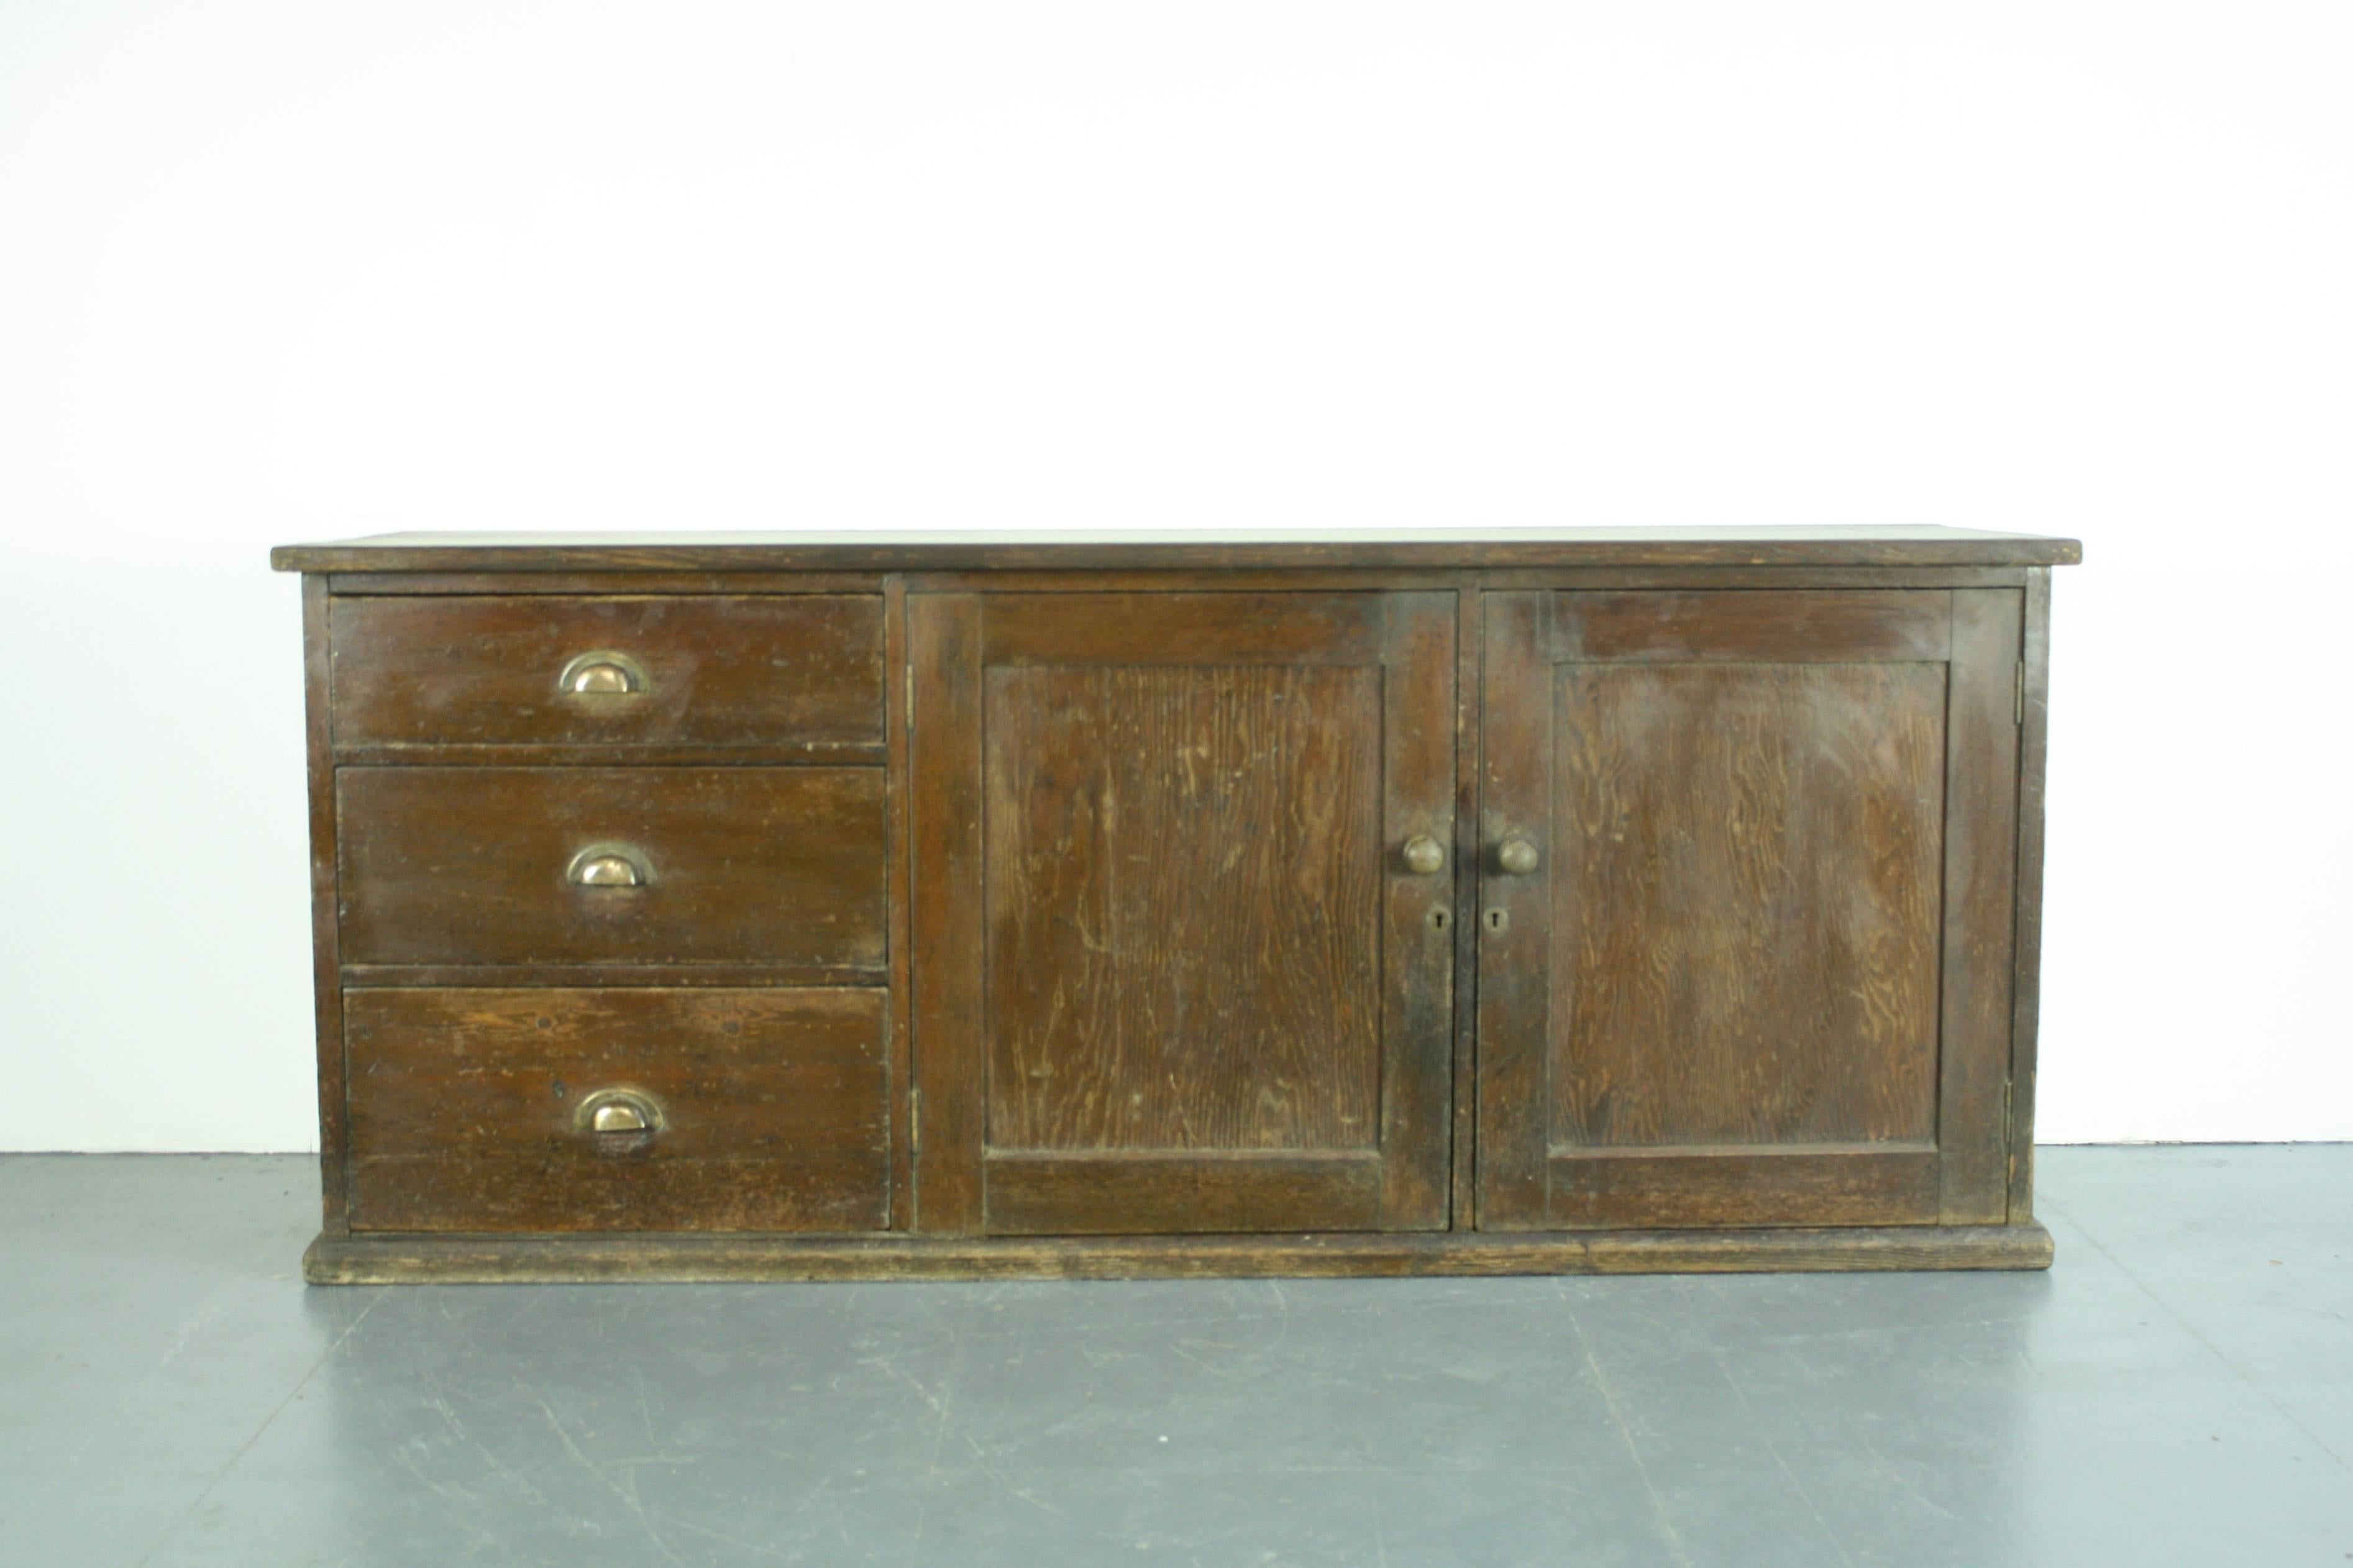 Wonderful dark wood counter from the beginning of the last century. Lovely solid piece.

In good vintage condition. Some wear and tear to be expected with age, but nothing which detracts. If you bear in mind this item has come from a working shop,